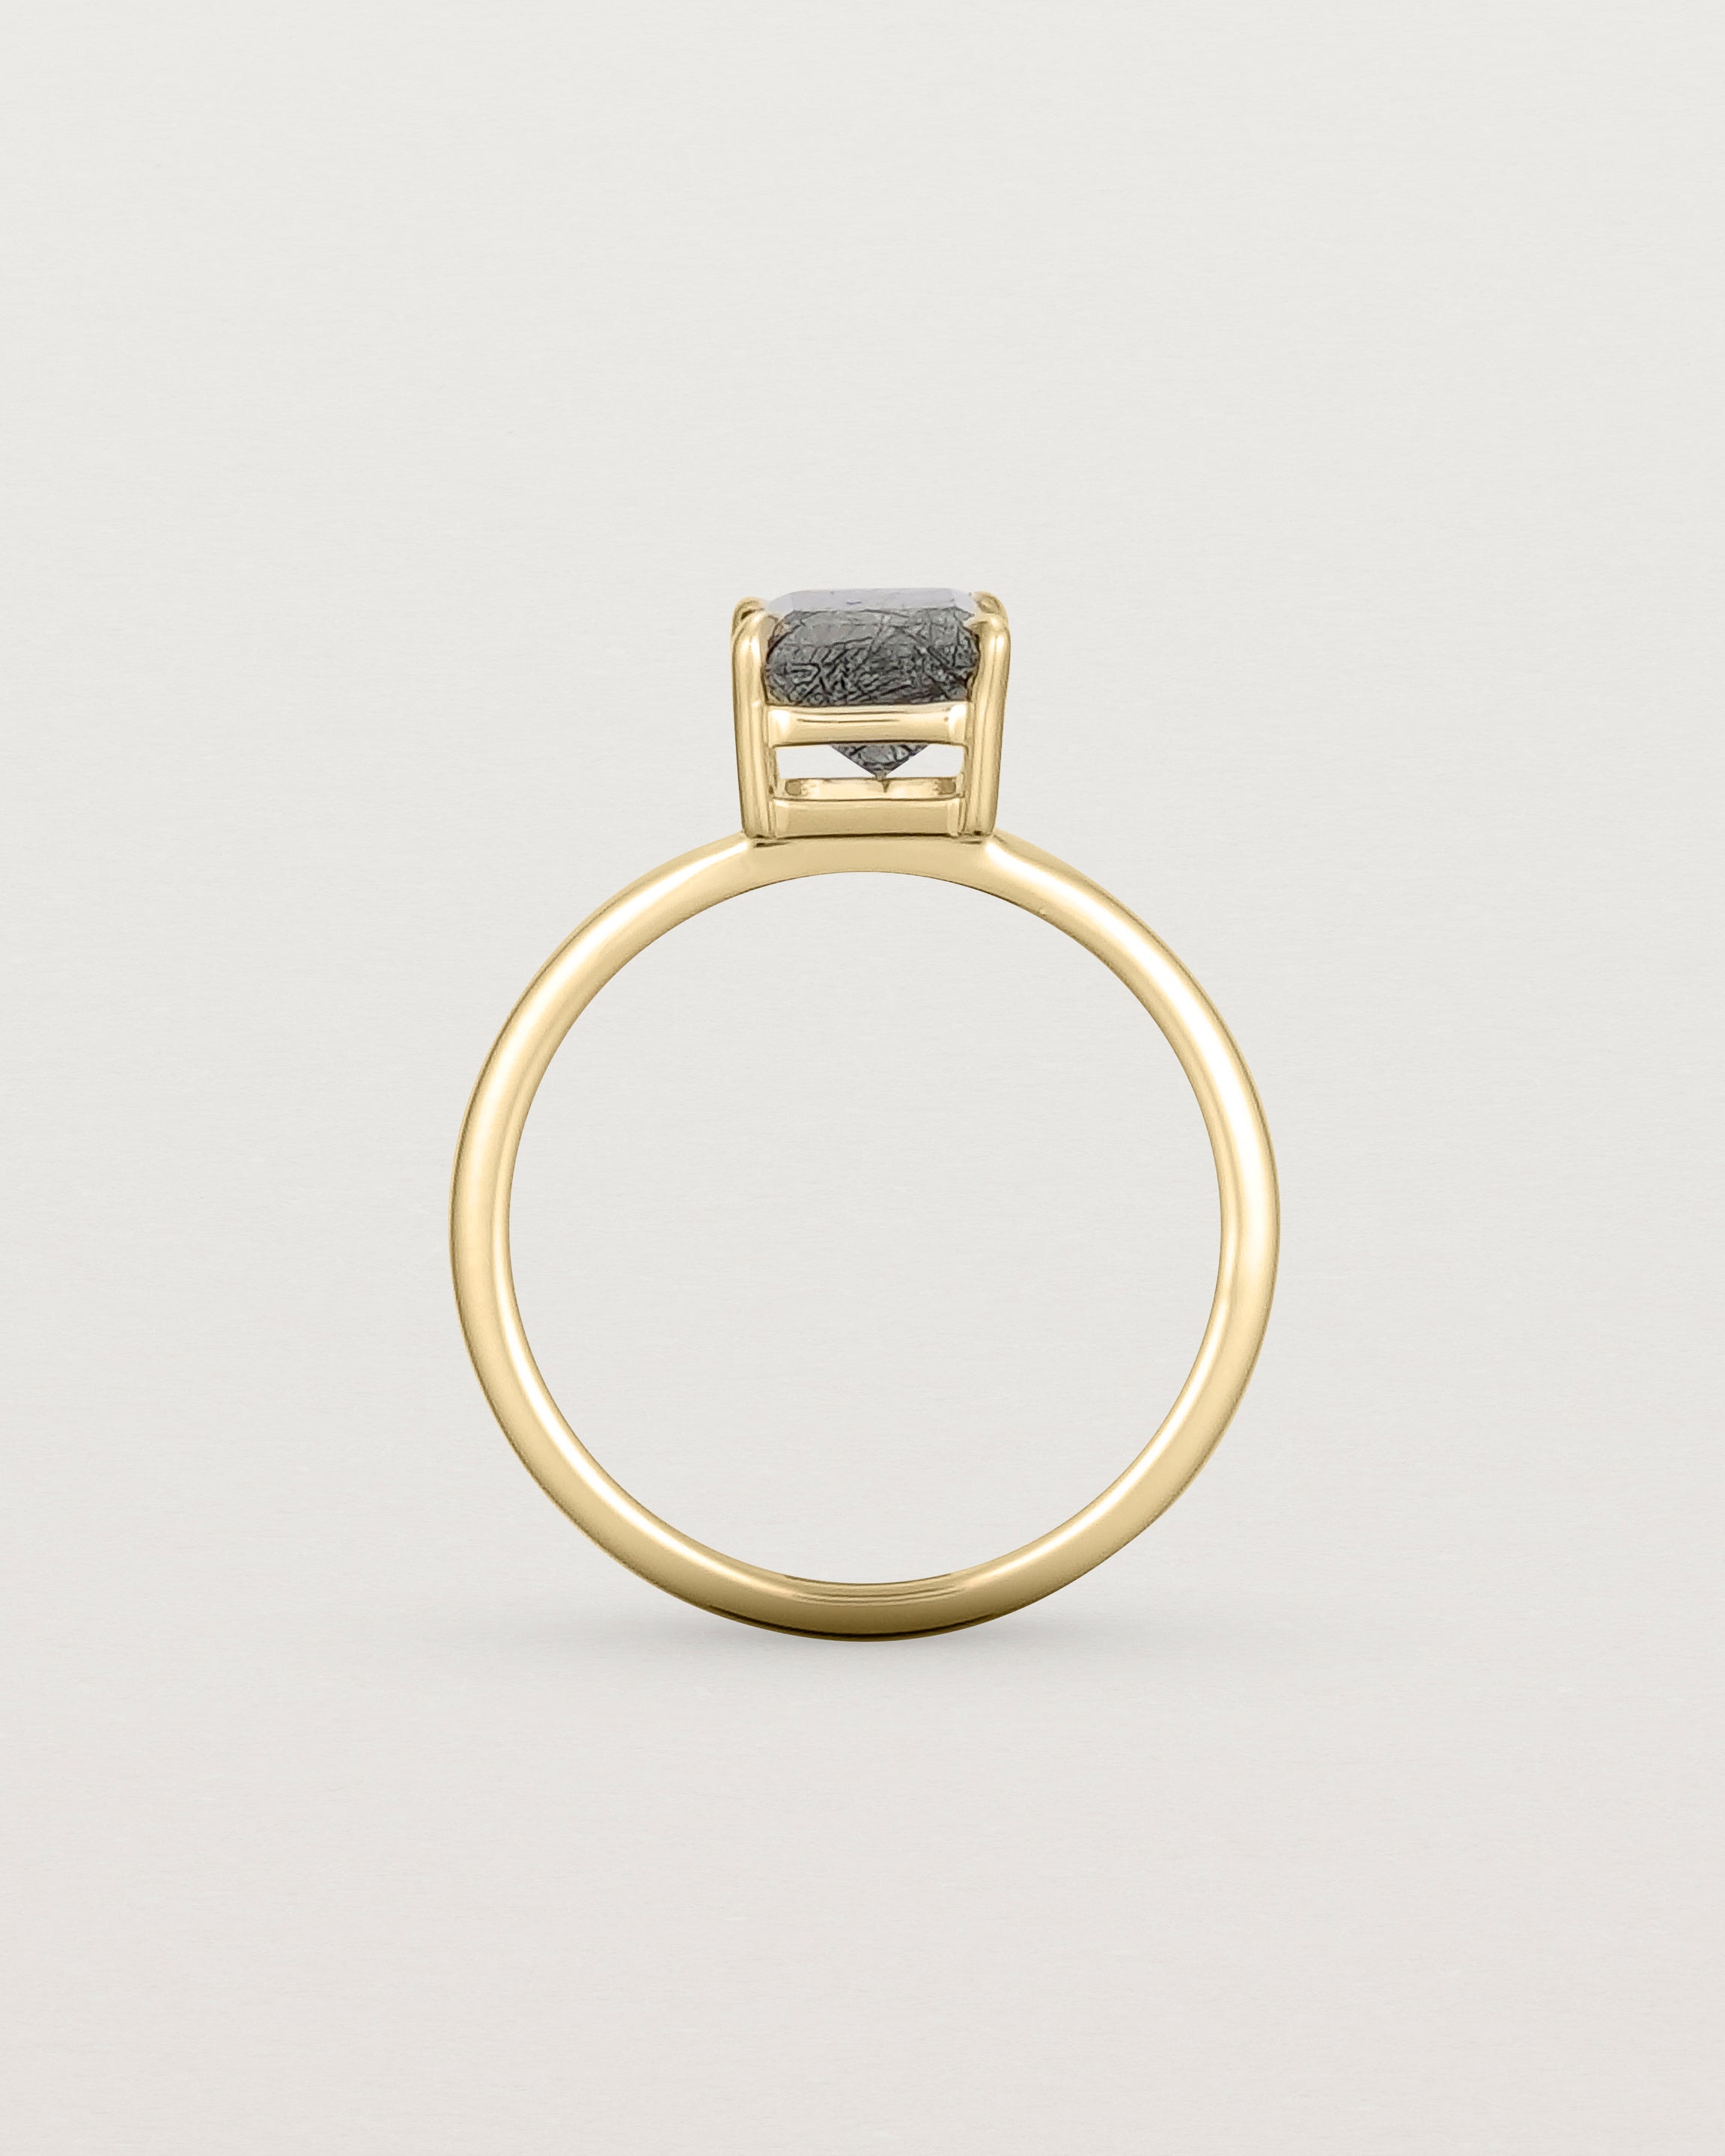 Standing view of the Una Emerald Solitaire | Tourmalinated Quartz | Yellow Gold.